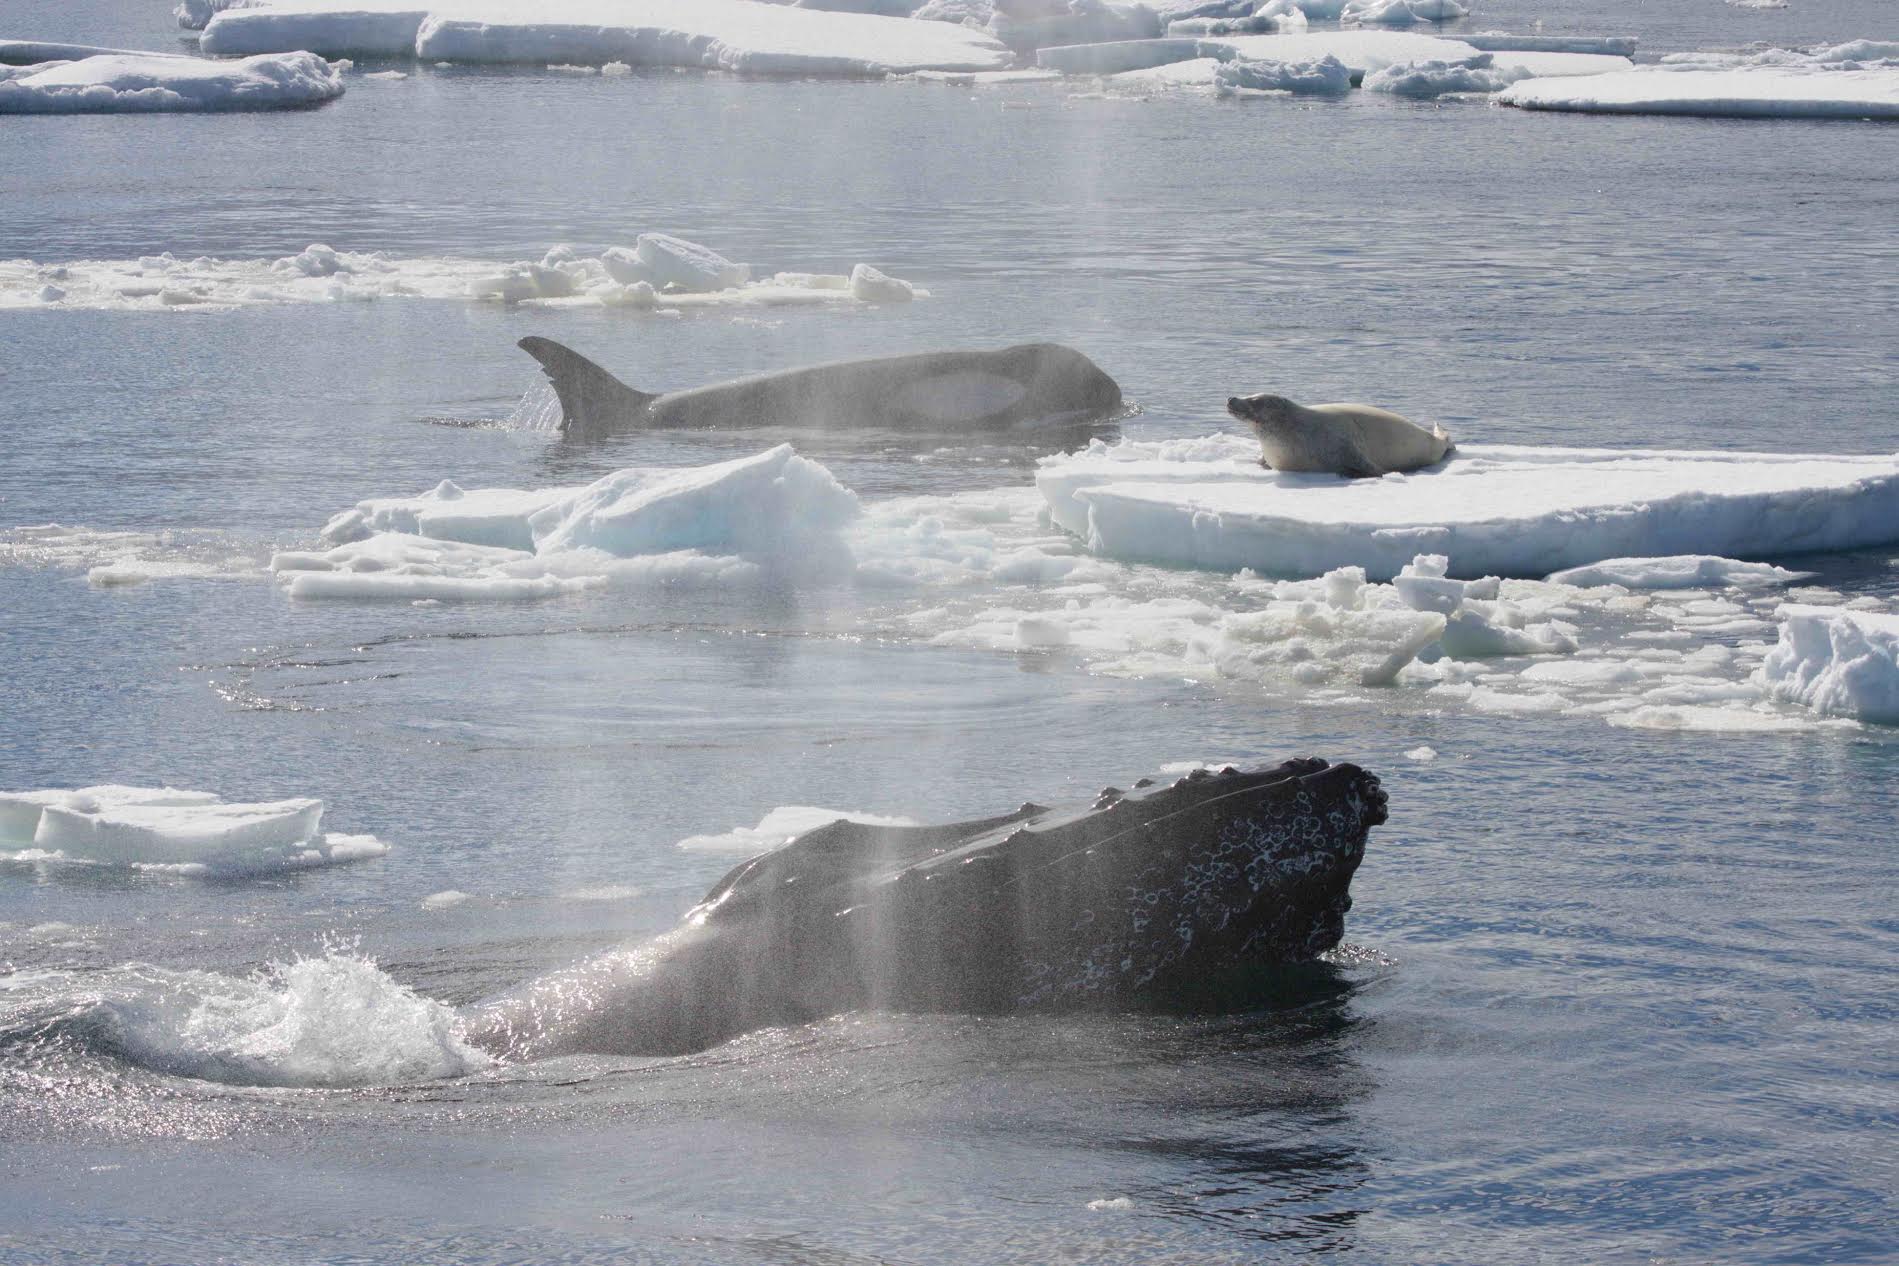 One killer whale from a pod hunting a crabeater seal on an ice floe when a pair of humpbacks (one in the foreground) charged in and drove off the killer whales. Credit: Robert L. Pitman